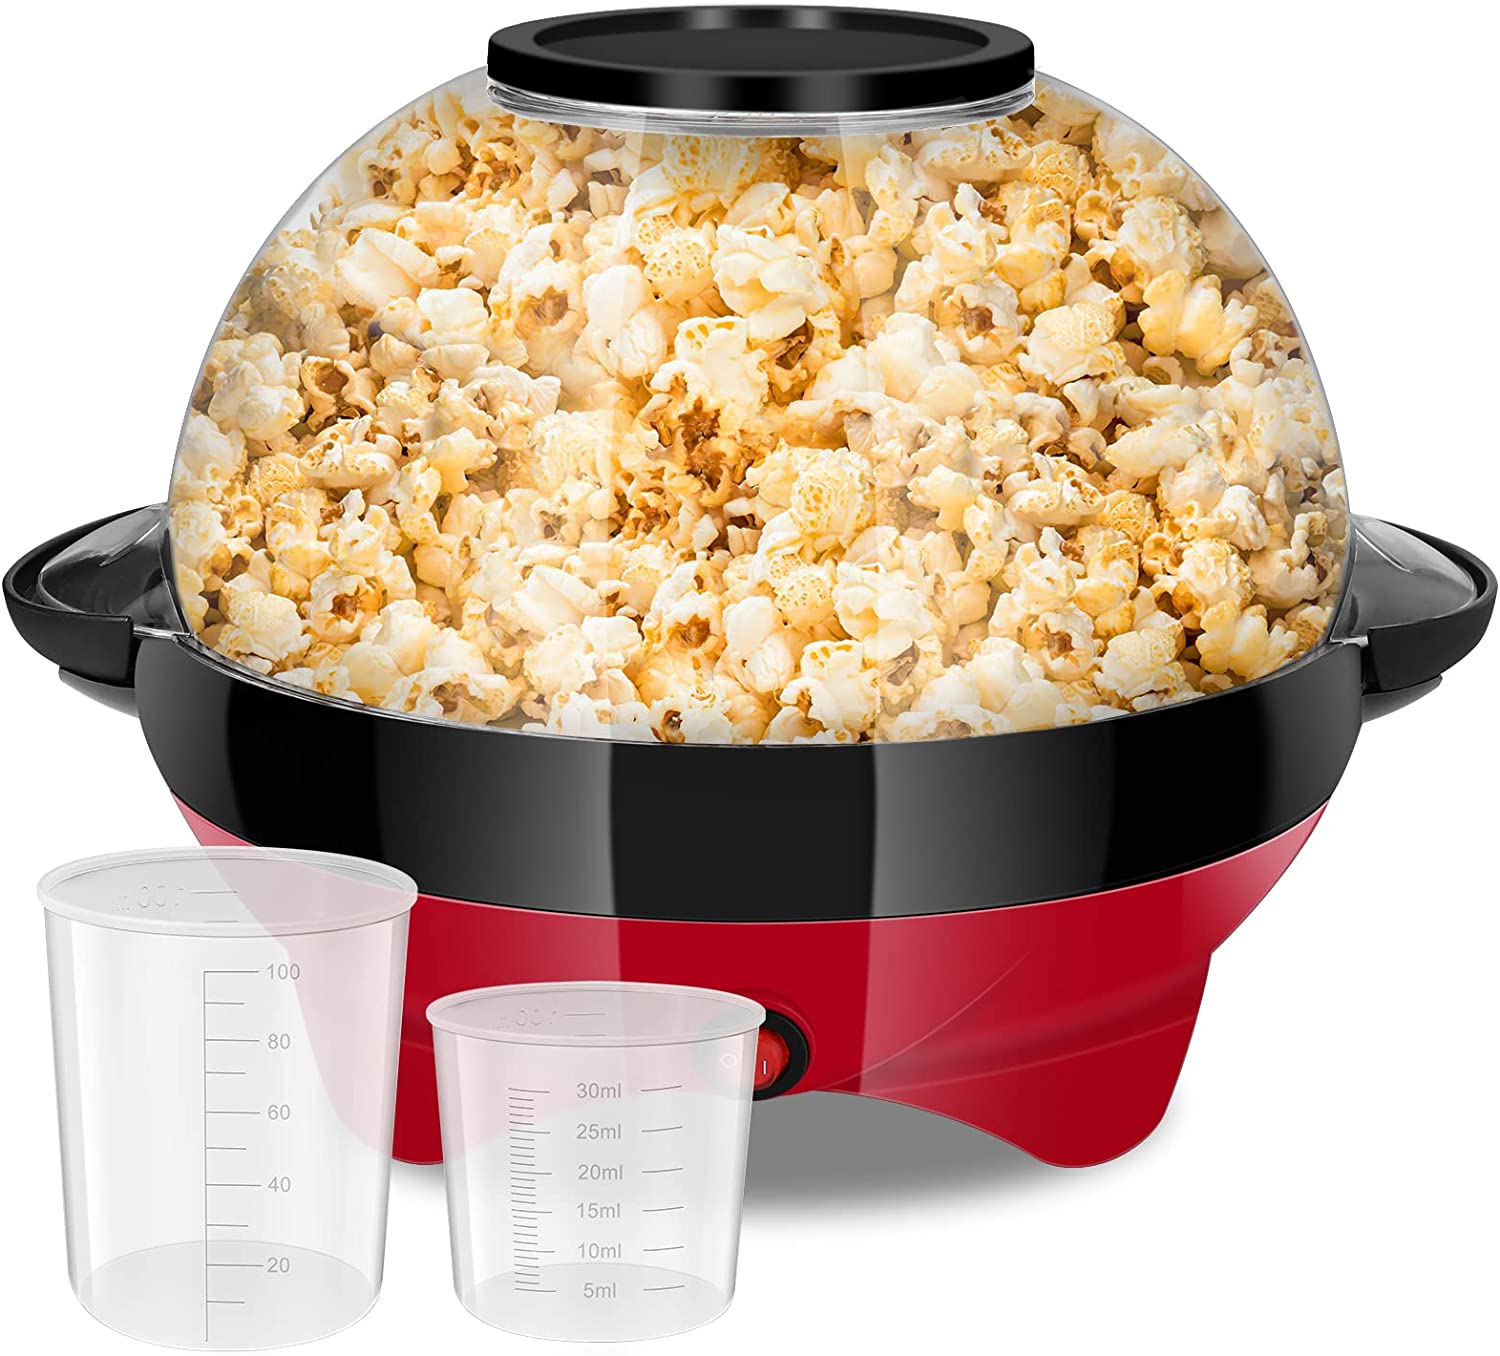 TLSUNNY Popcorn Machine, Popcorn Maker, 800 W Popcorn Machines with Sugar and Oil, Removable Heating Surface, Non-Stick Coating and Lid, with 2 Measuring Cups (100 ml, 30 ml), 5 L, Large Lid as Serving Bowl